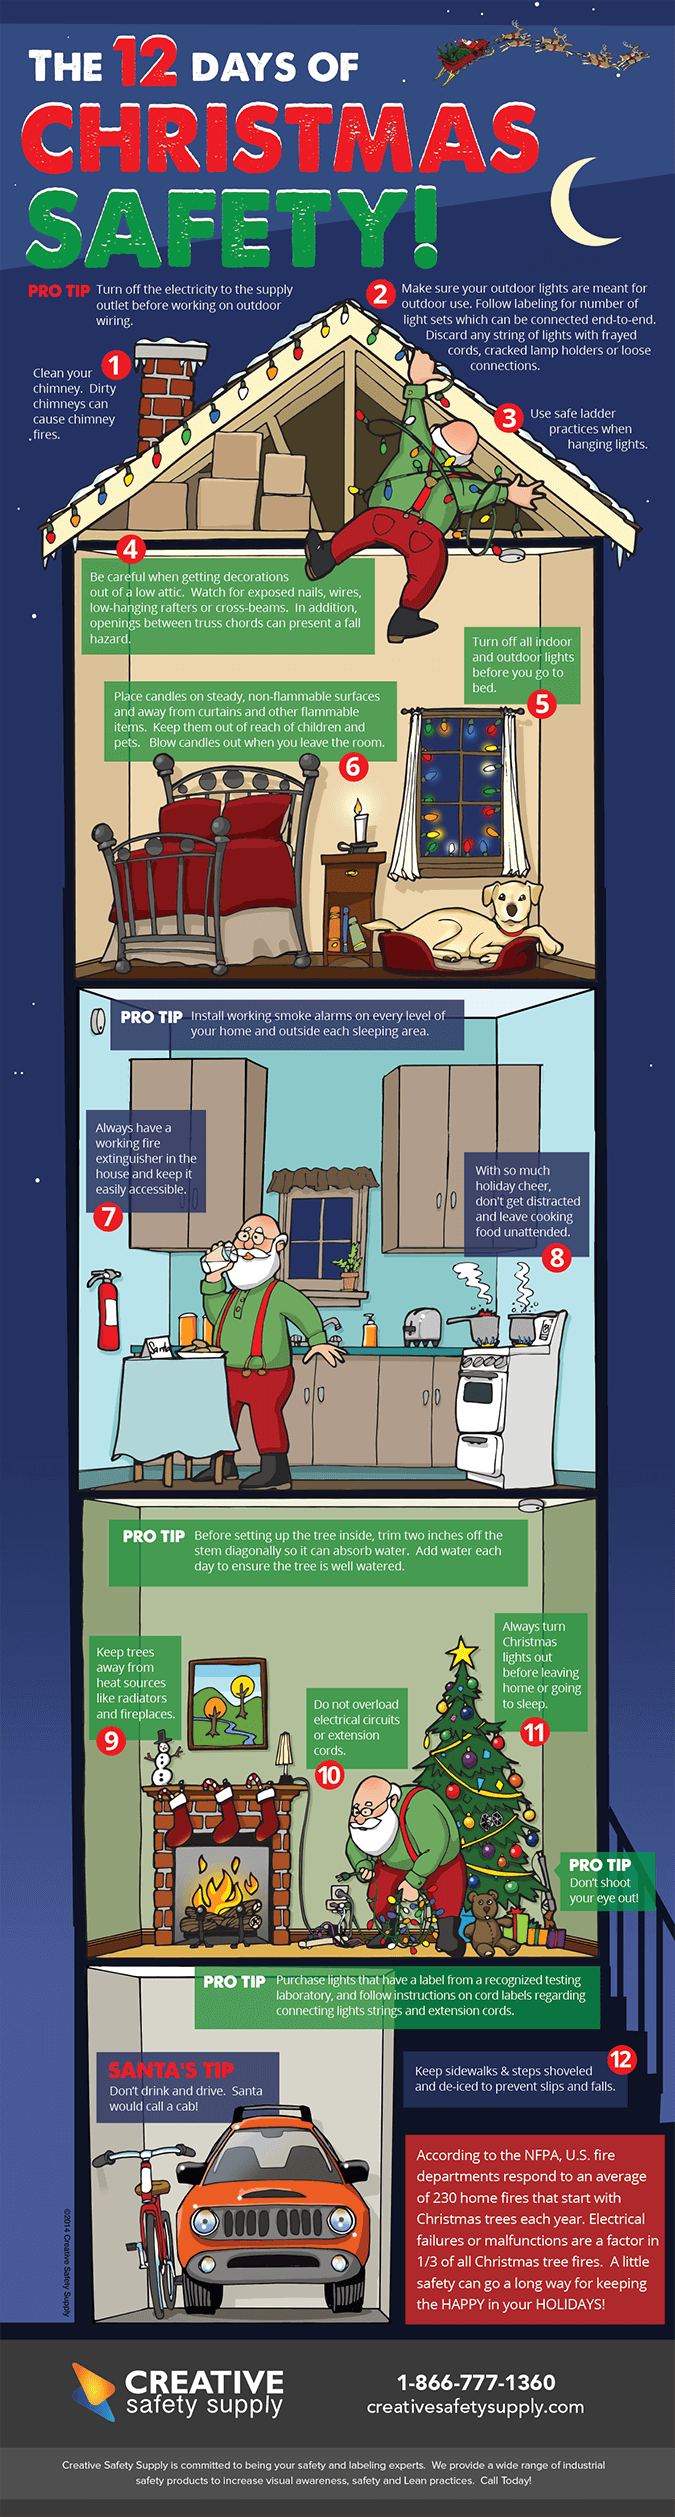 The 12 Days of Christmas Safety - Infographic by Creative Safety Supply